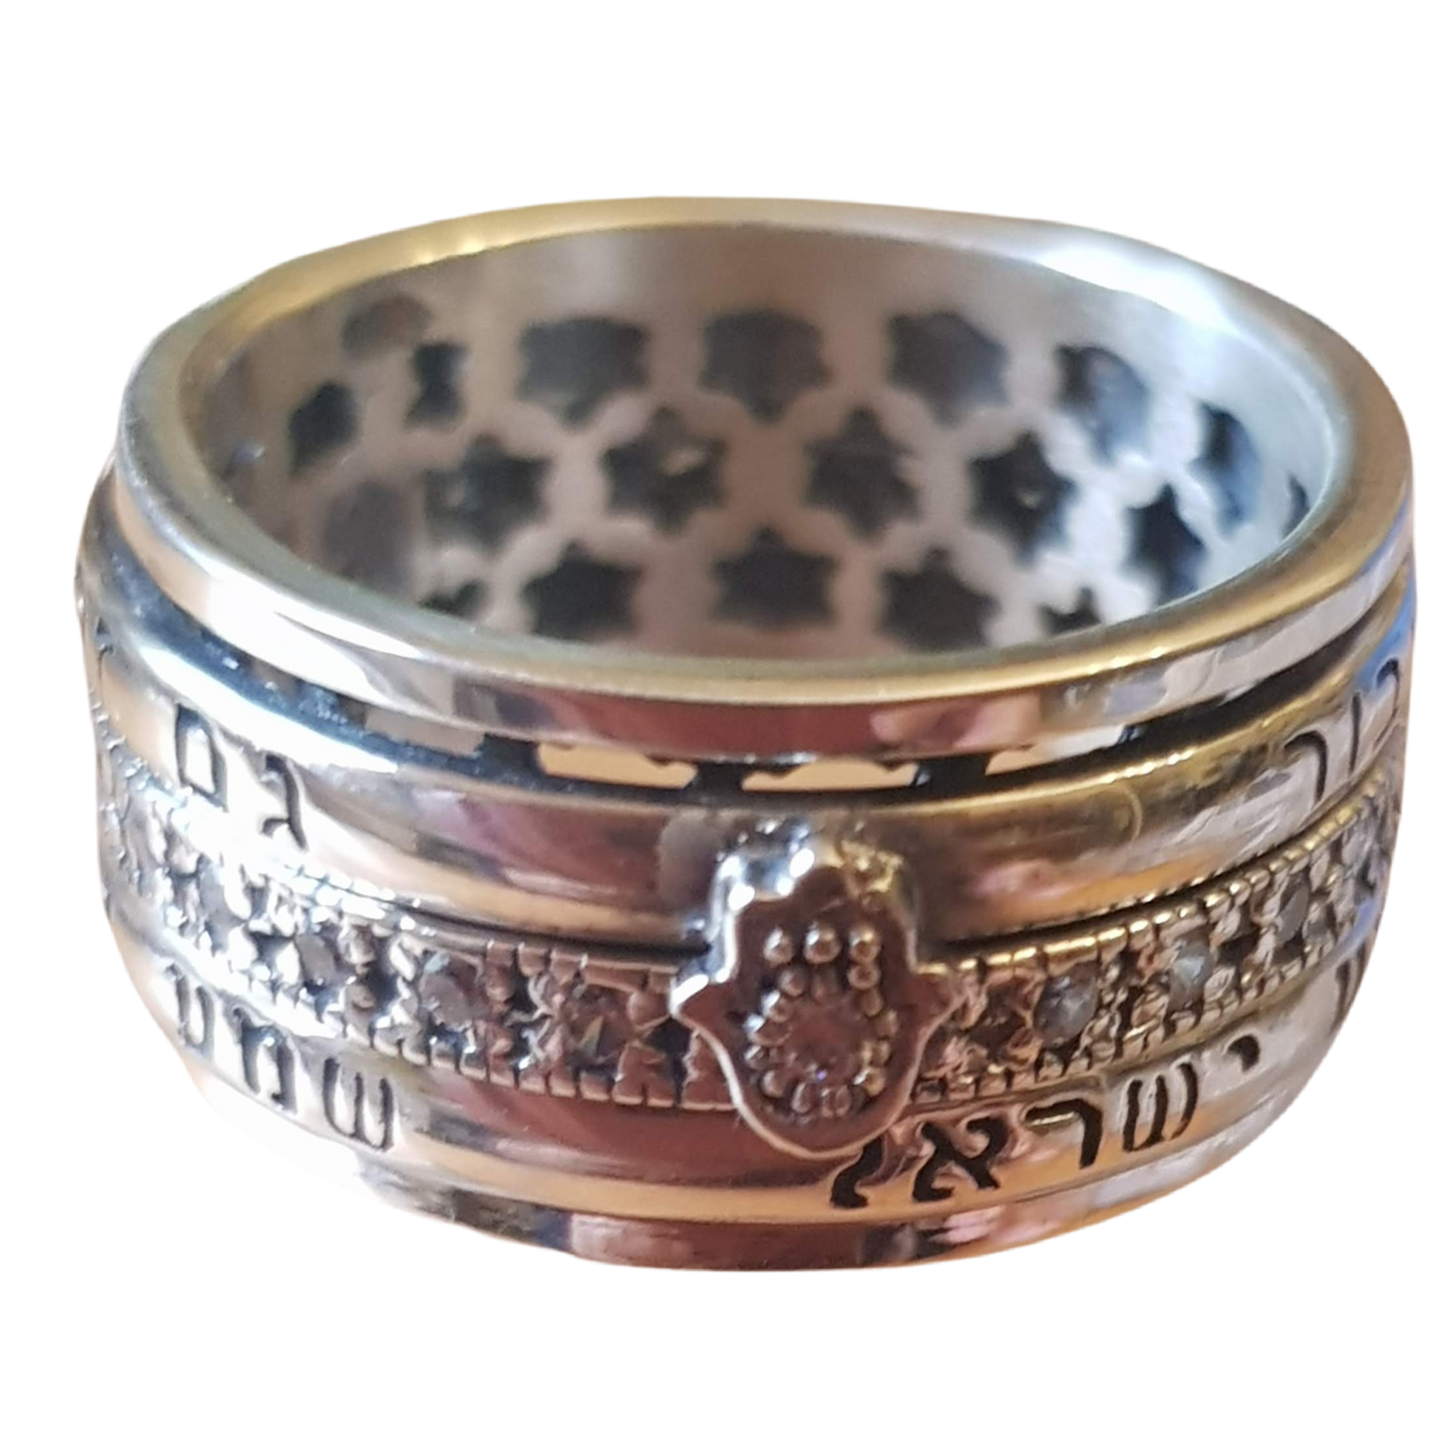 Bluenoemi Jewelry Rings Bluenoemi Israeli Jewelry | Personalized Jewelry Spinner Ring Inspiration Ring with Charms Hebrew Engraved Sterling Silver Ring